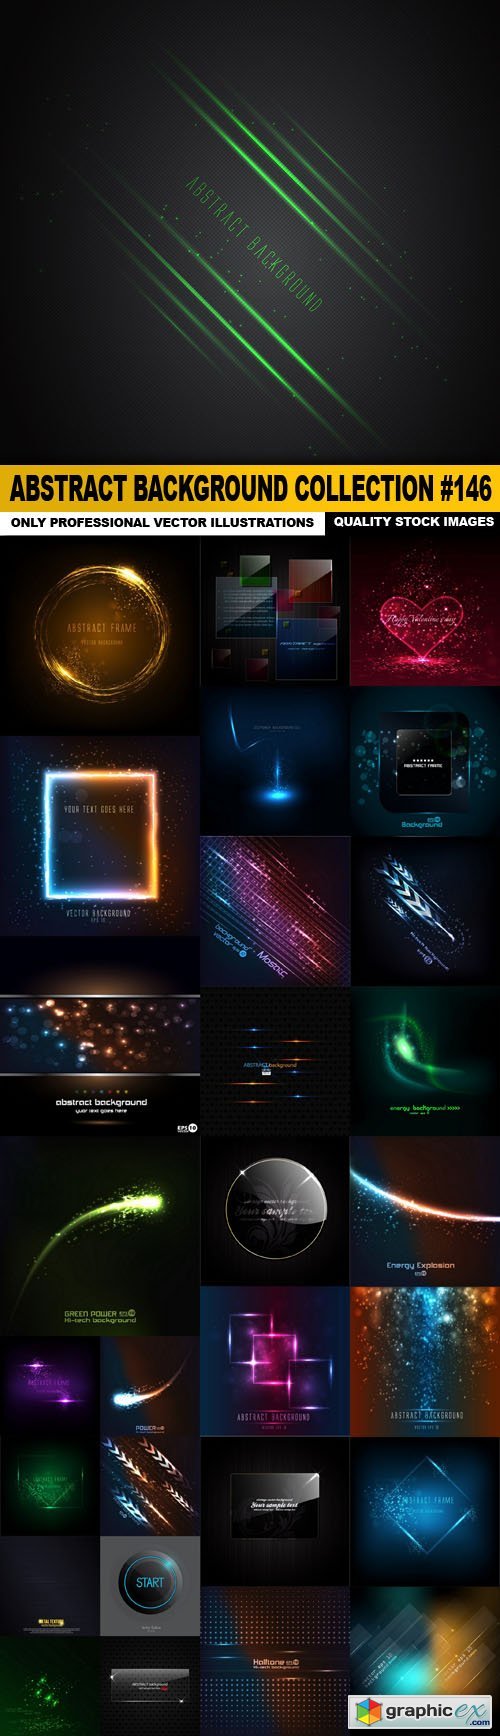 Abstract Background Collection #146